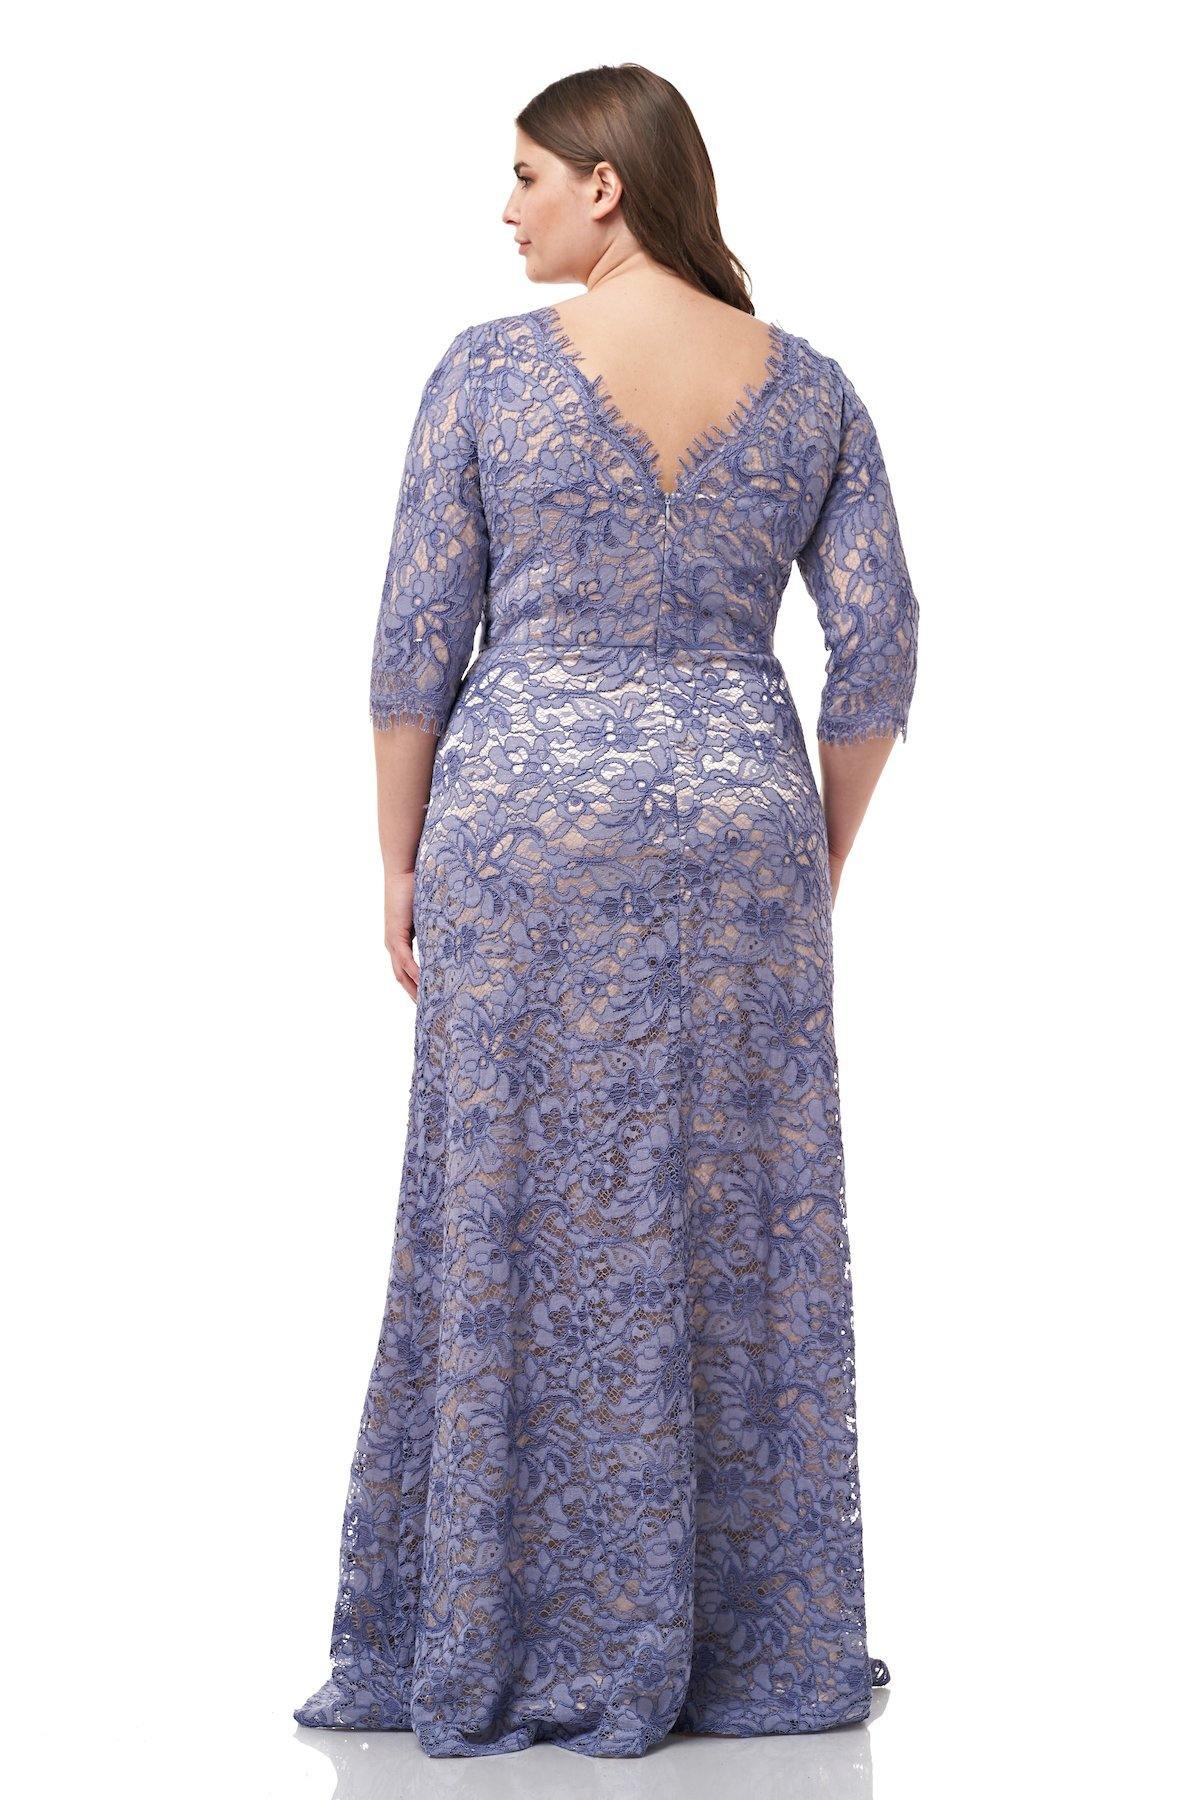 JS Collections Long Formal Plus Size Dress 866467W - The Dress Outlet